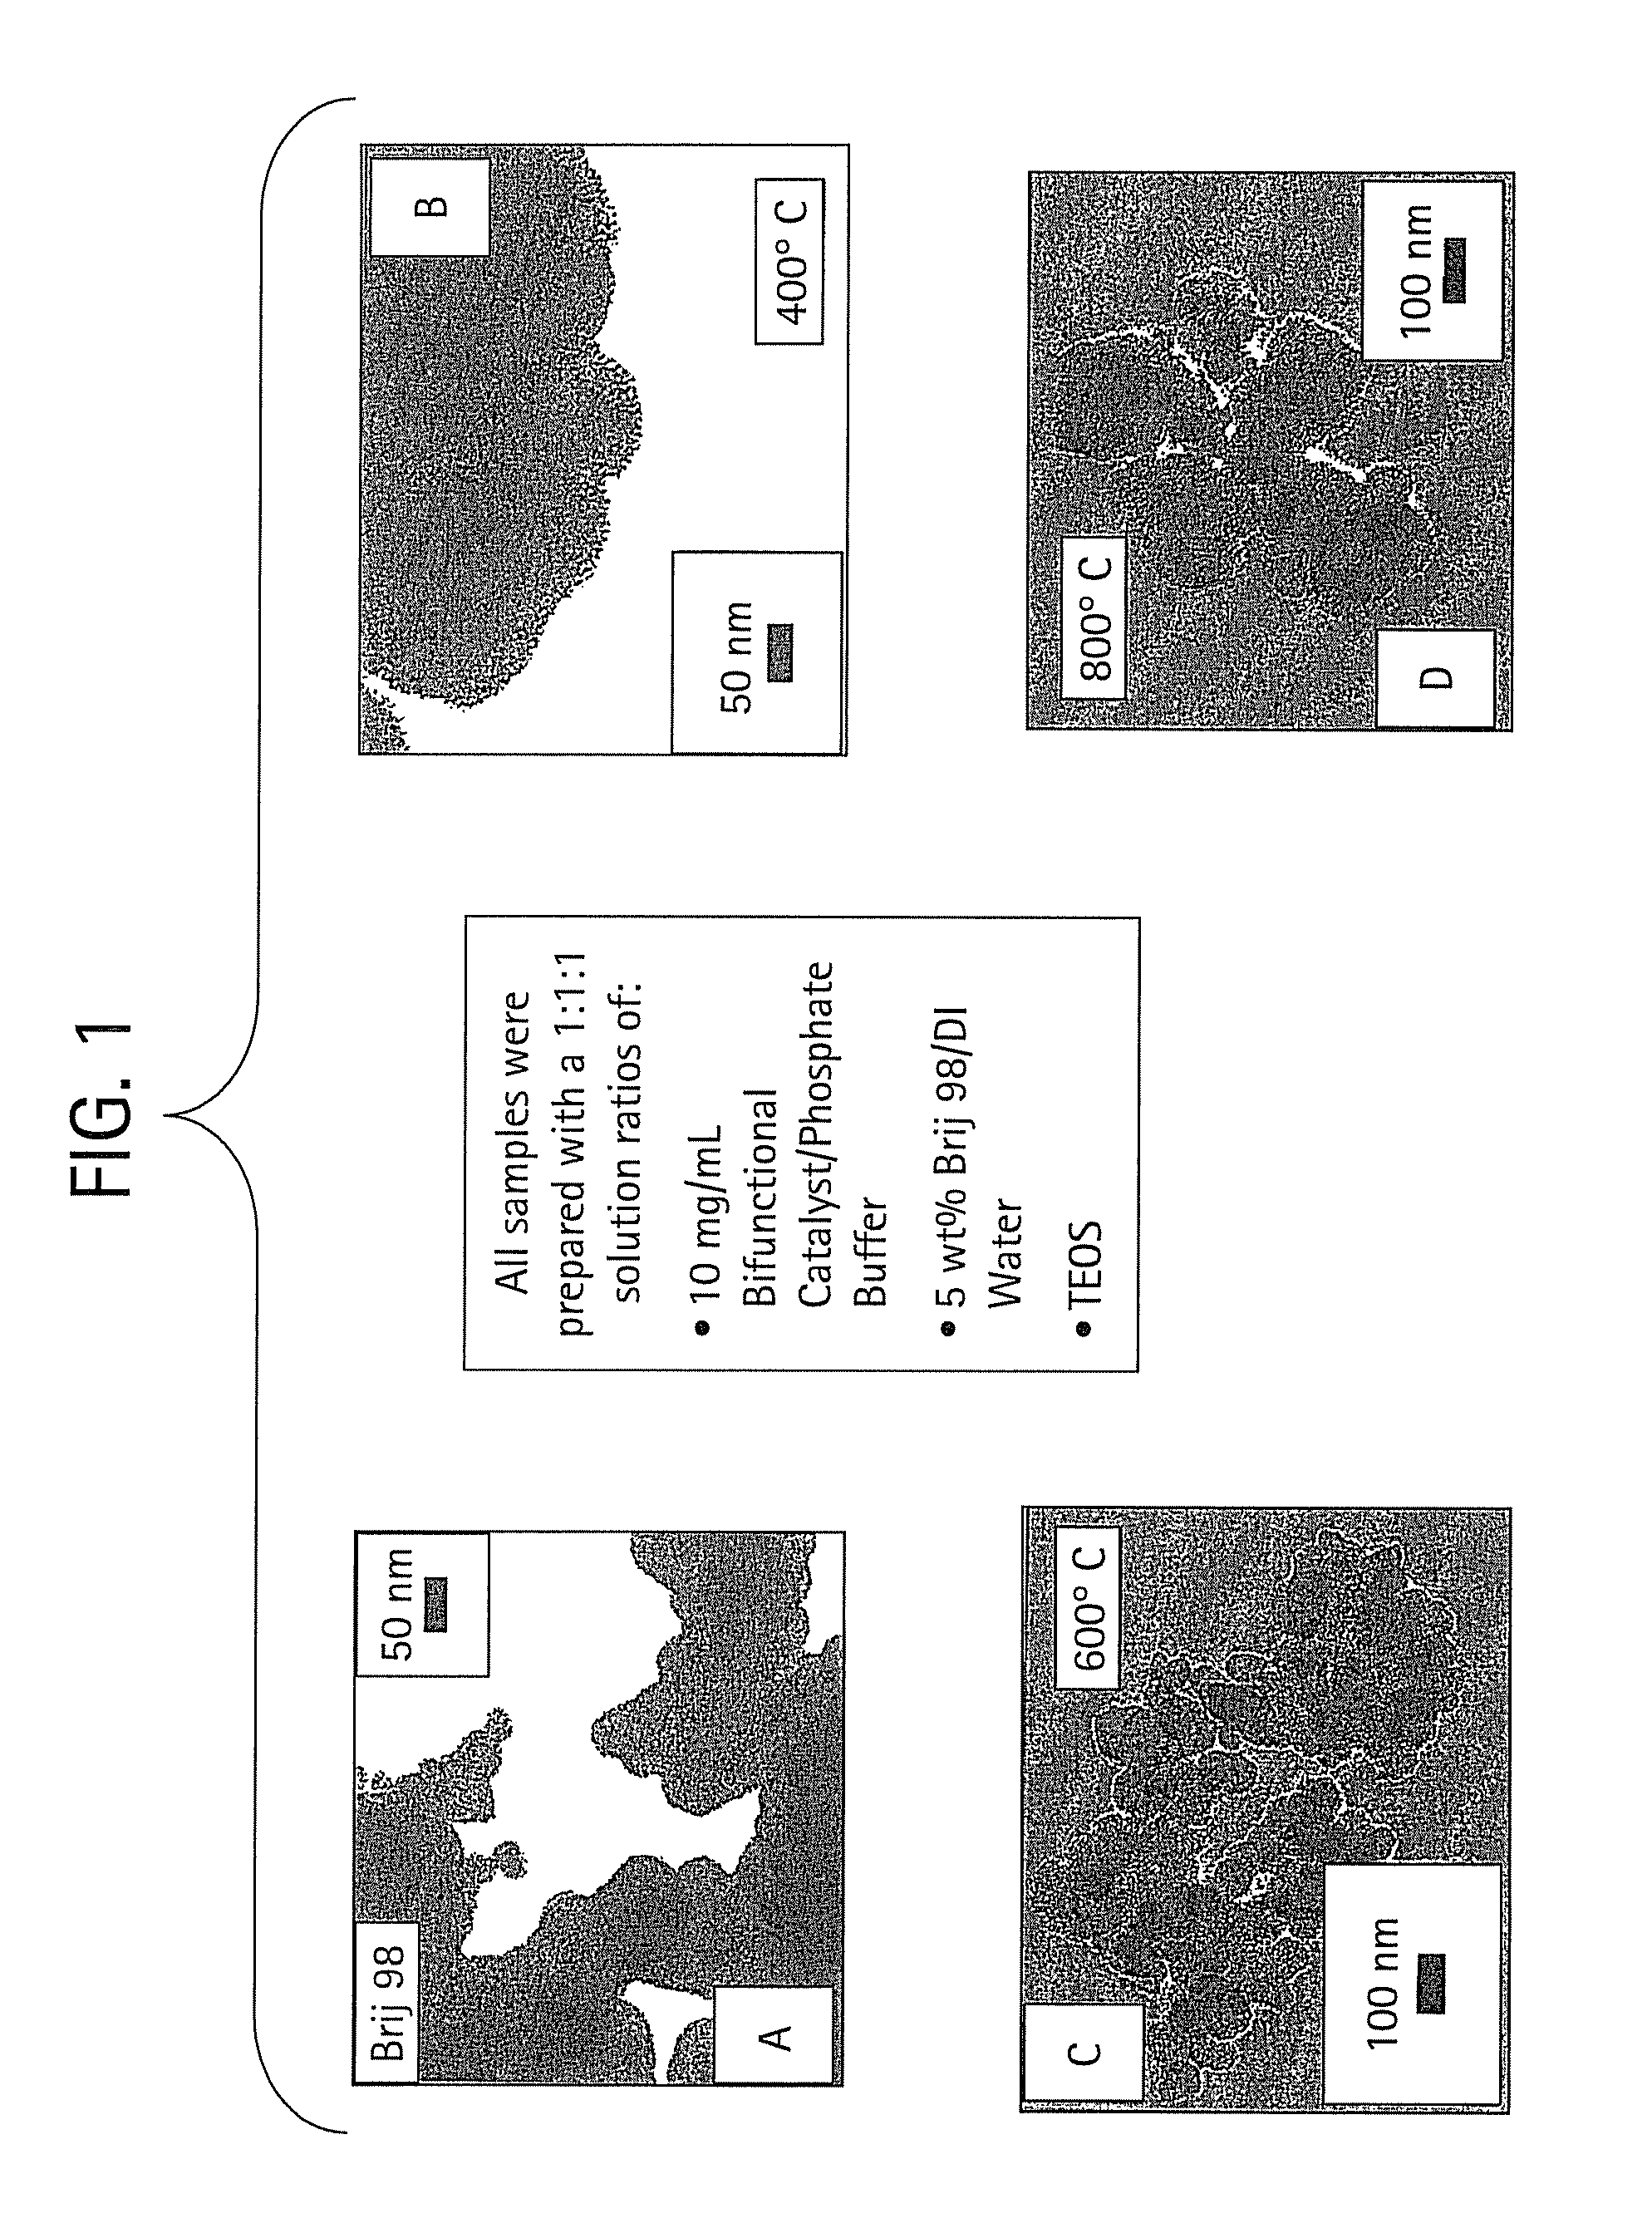 Highly condensed mesoporous silicate compositions and methods